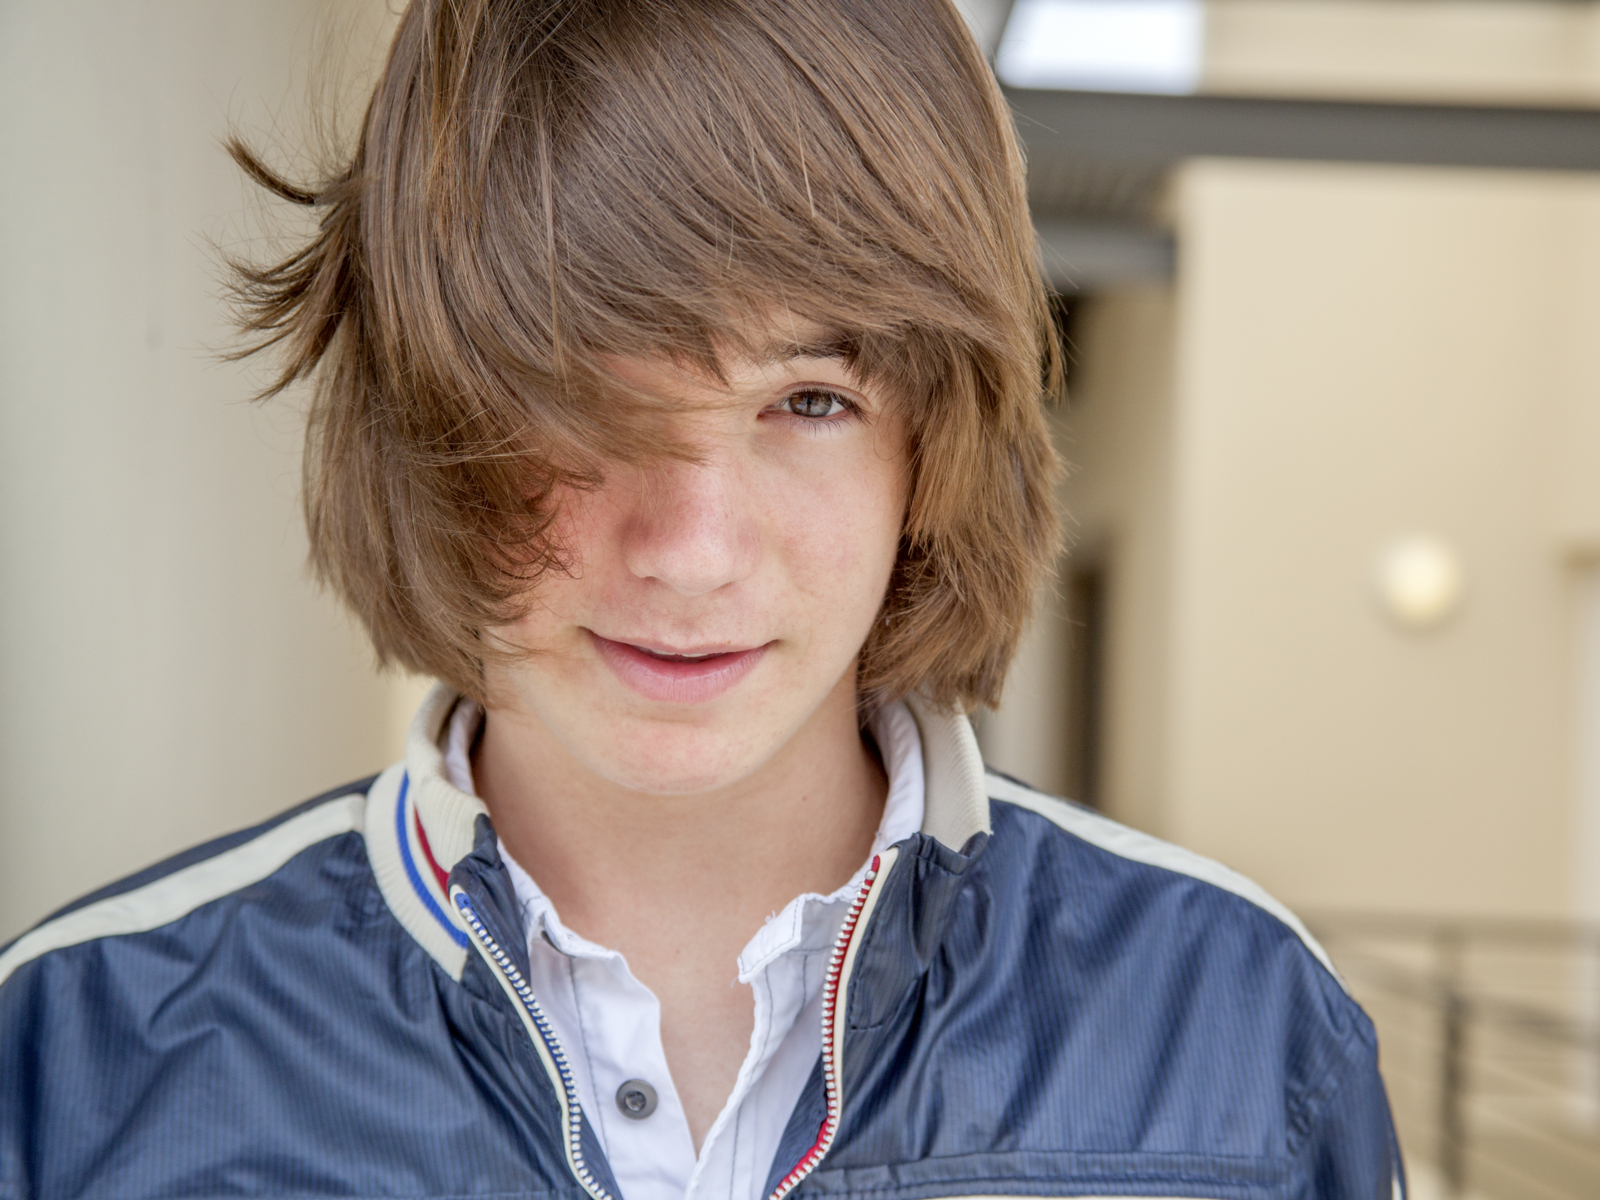 15 Best Long Hairstyles for Boys in 2023